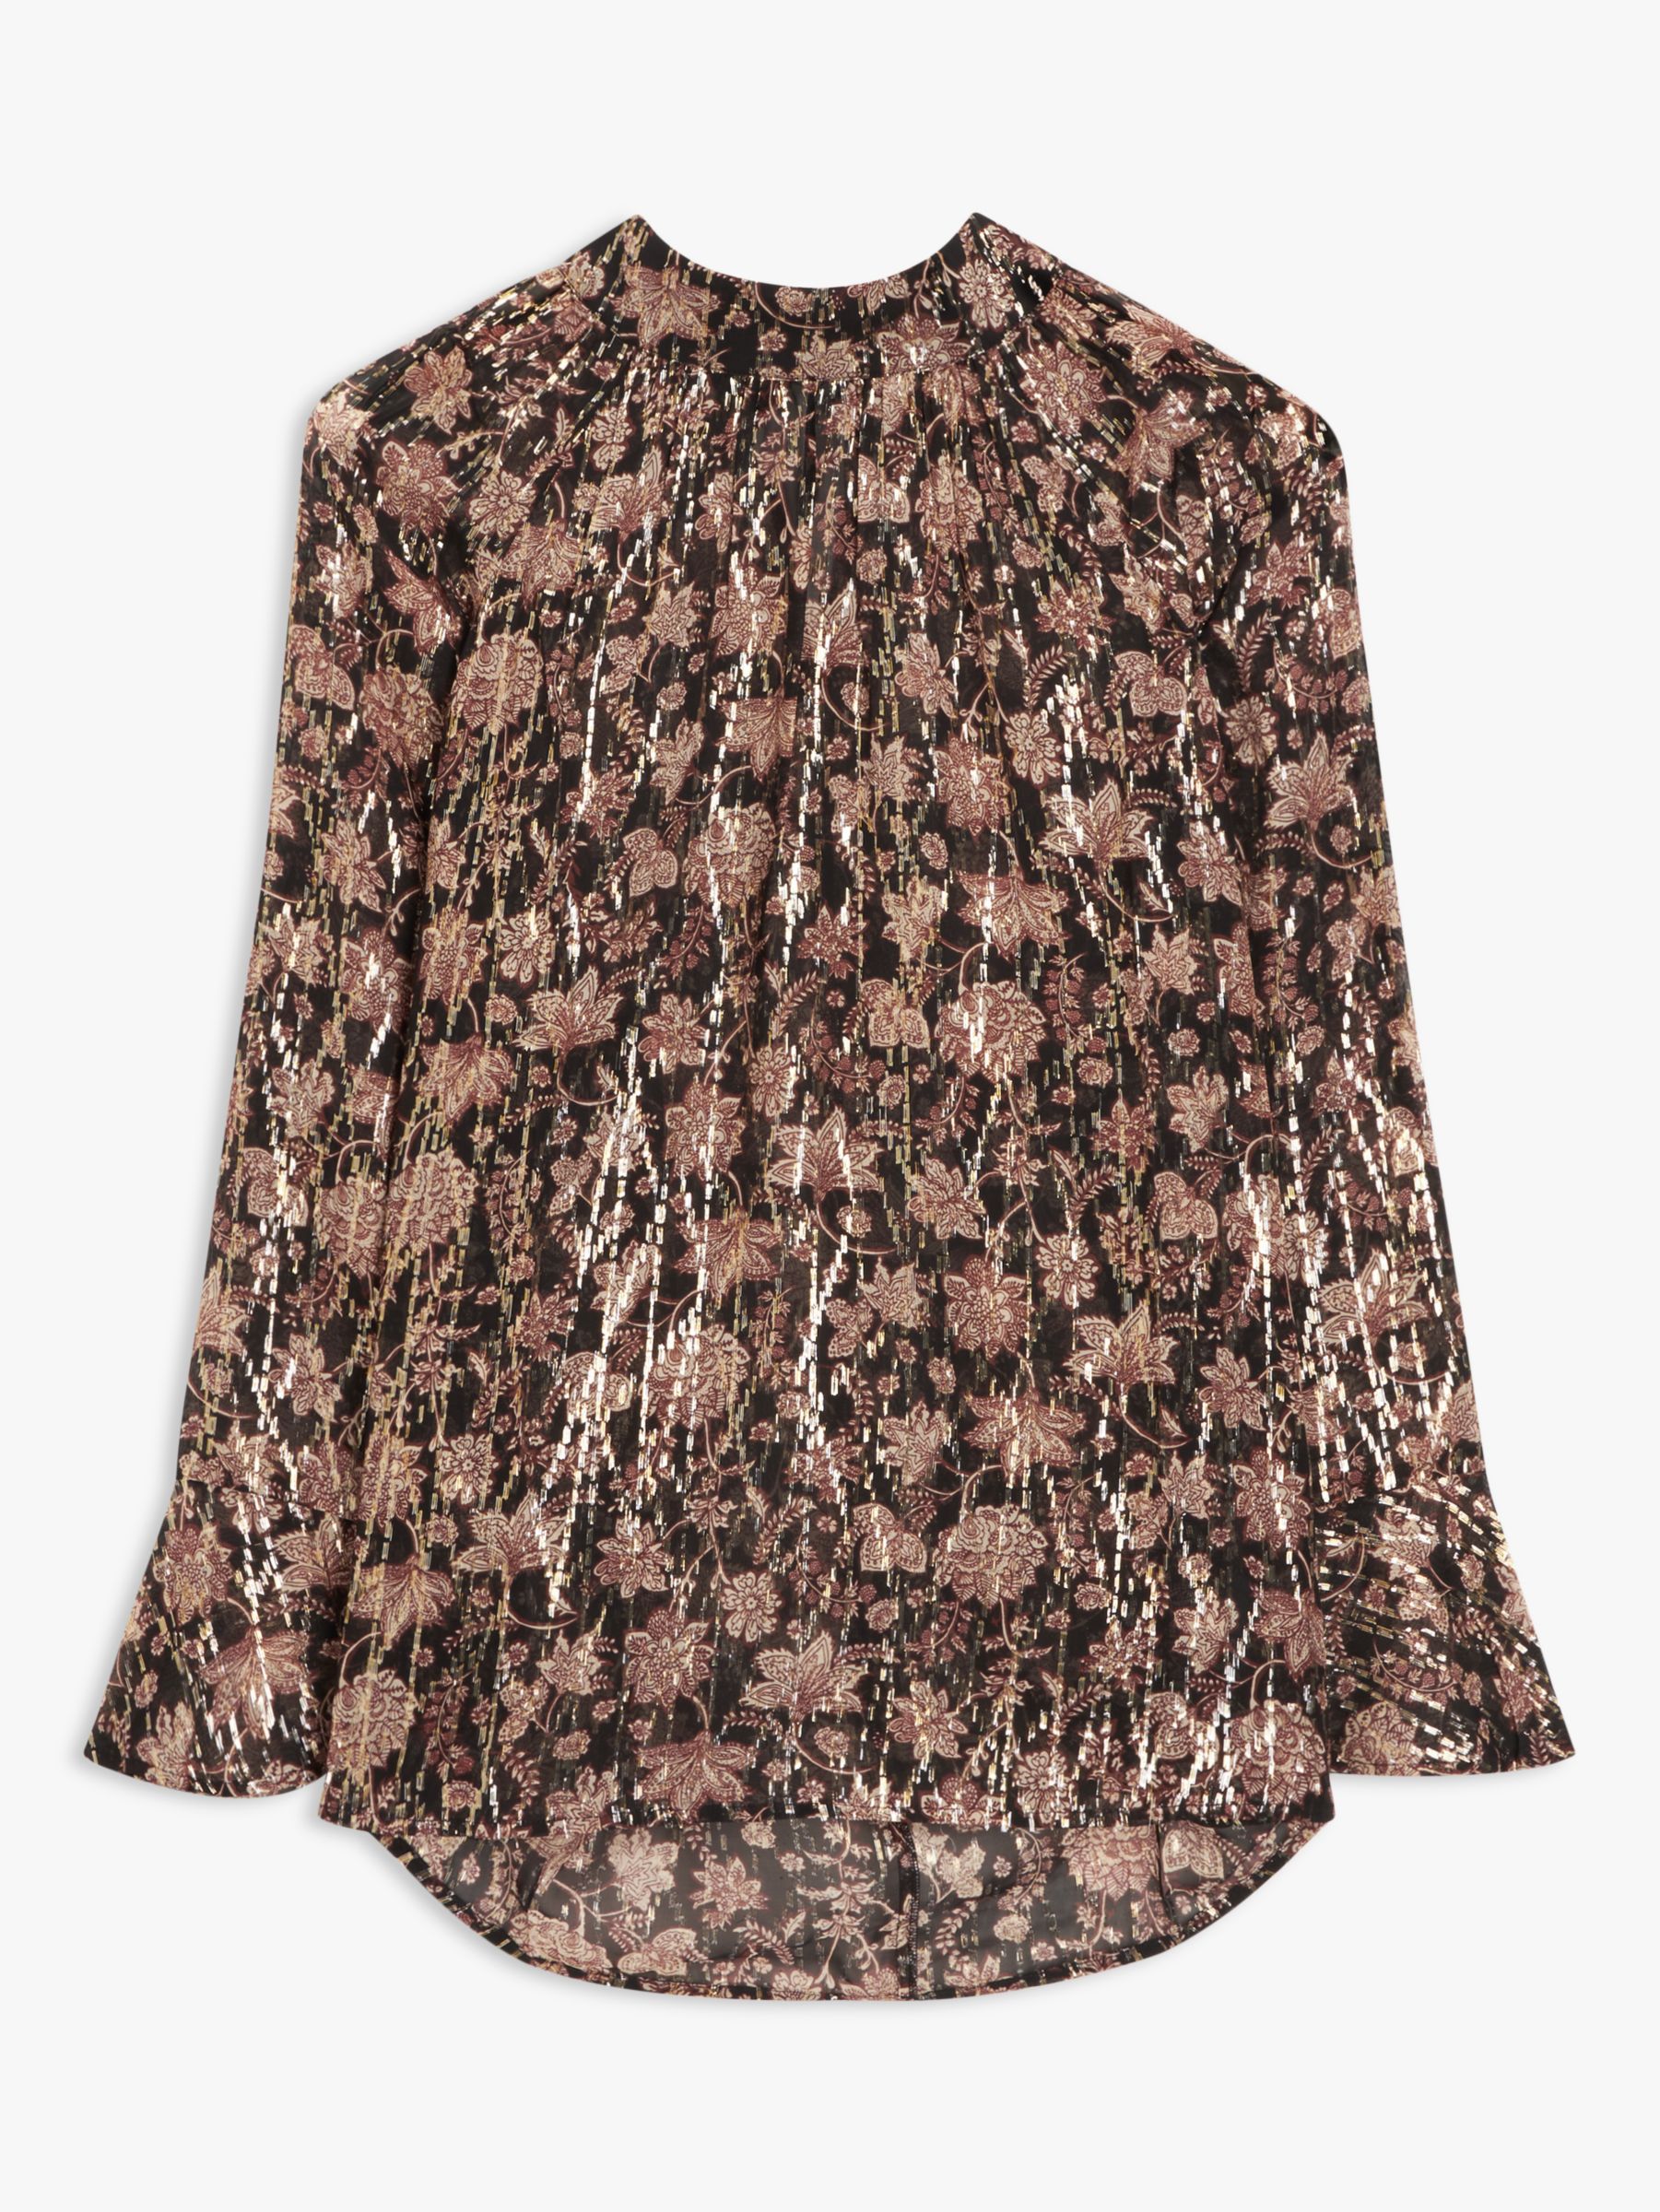 AND/OR Delphine Rustic Floral Top, Multi at John Lewis & Partners